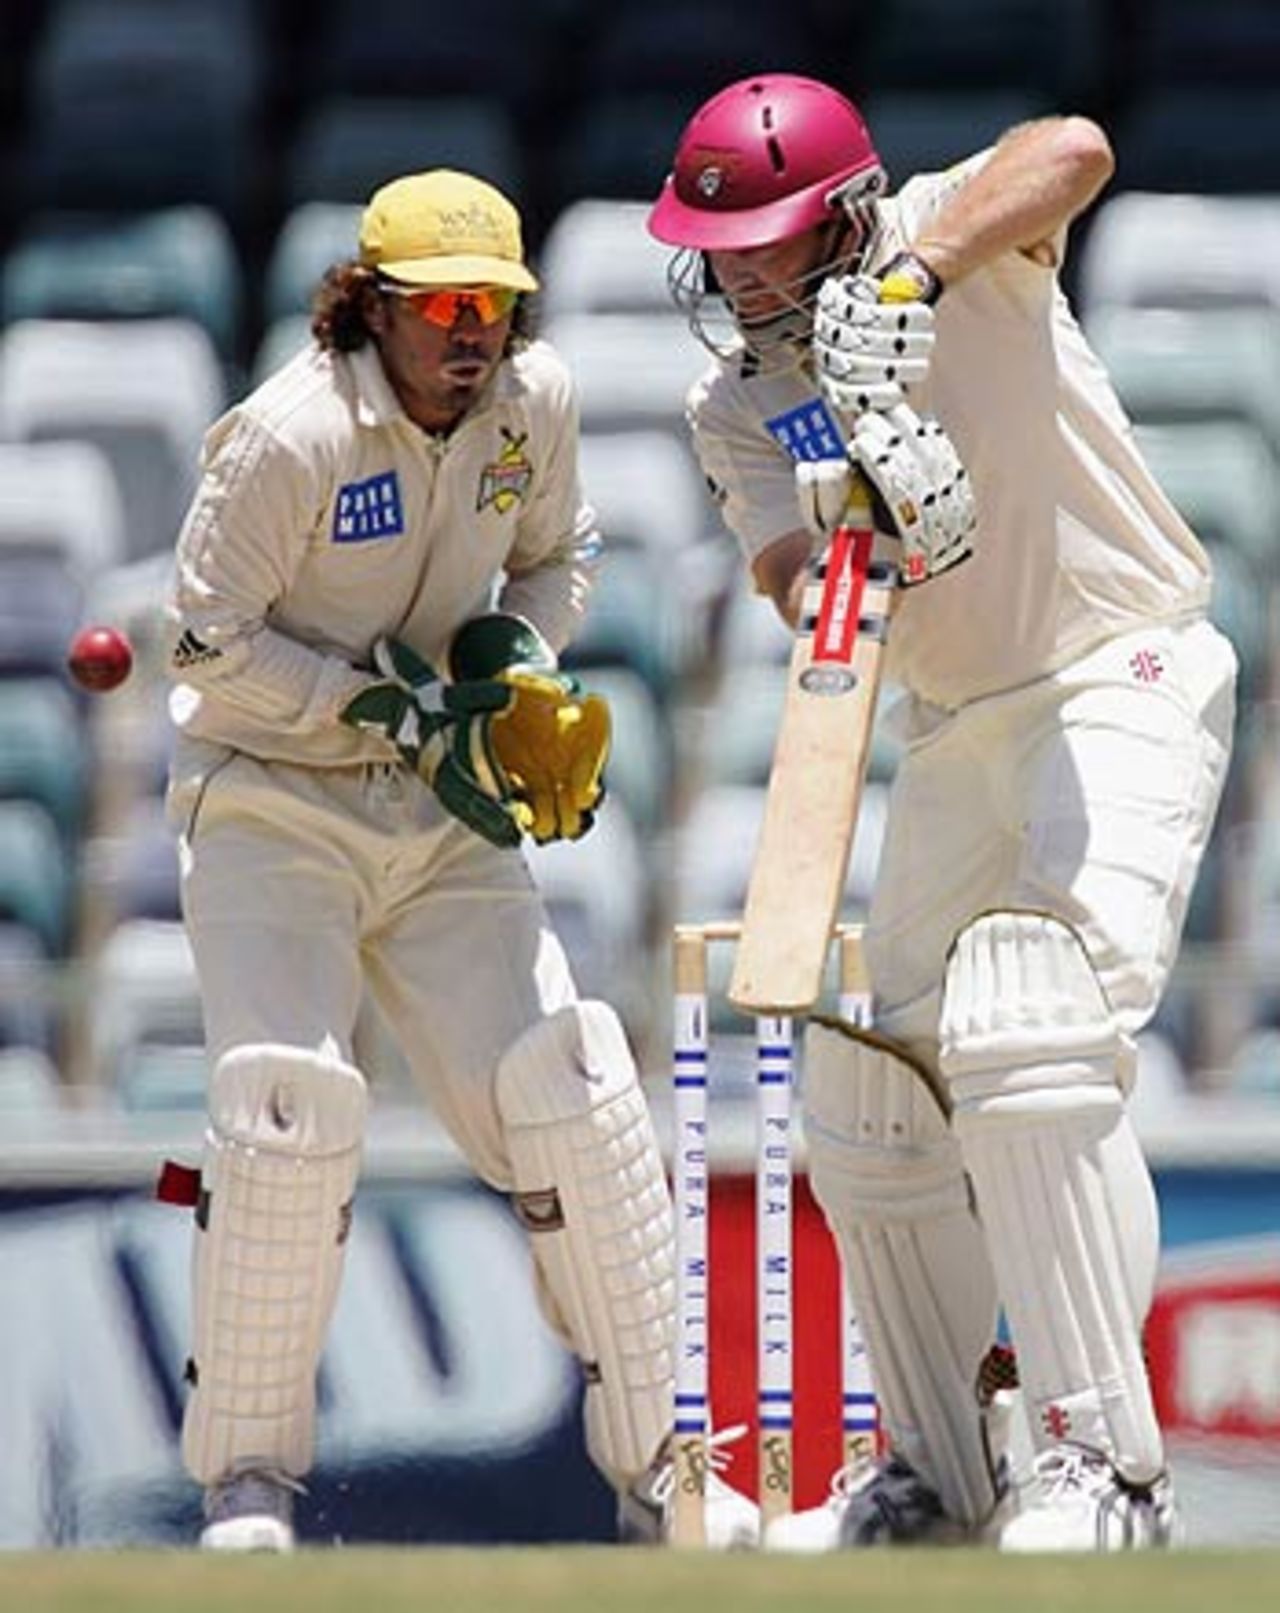 Martin Love's 106 was the highlight of Queensland's first innings, Western Australia v Queensland, Perth, January 16, 2006